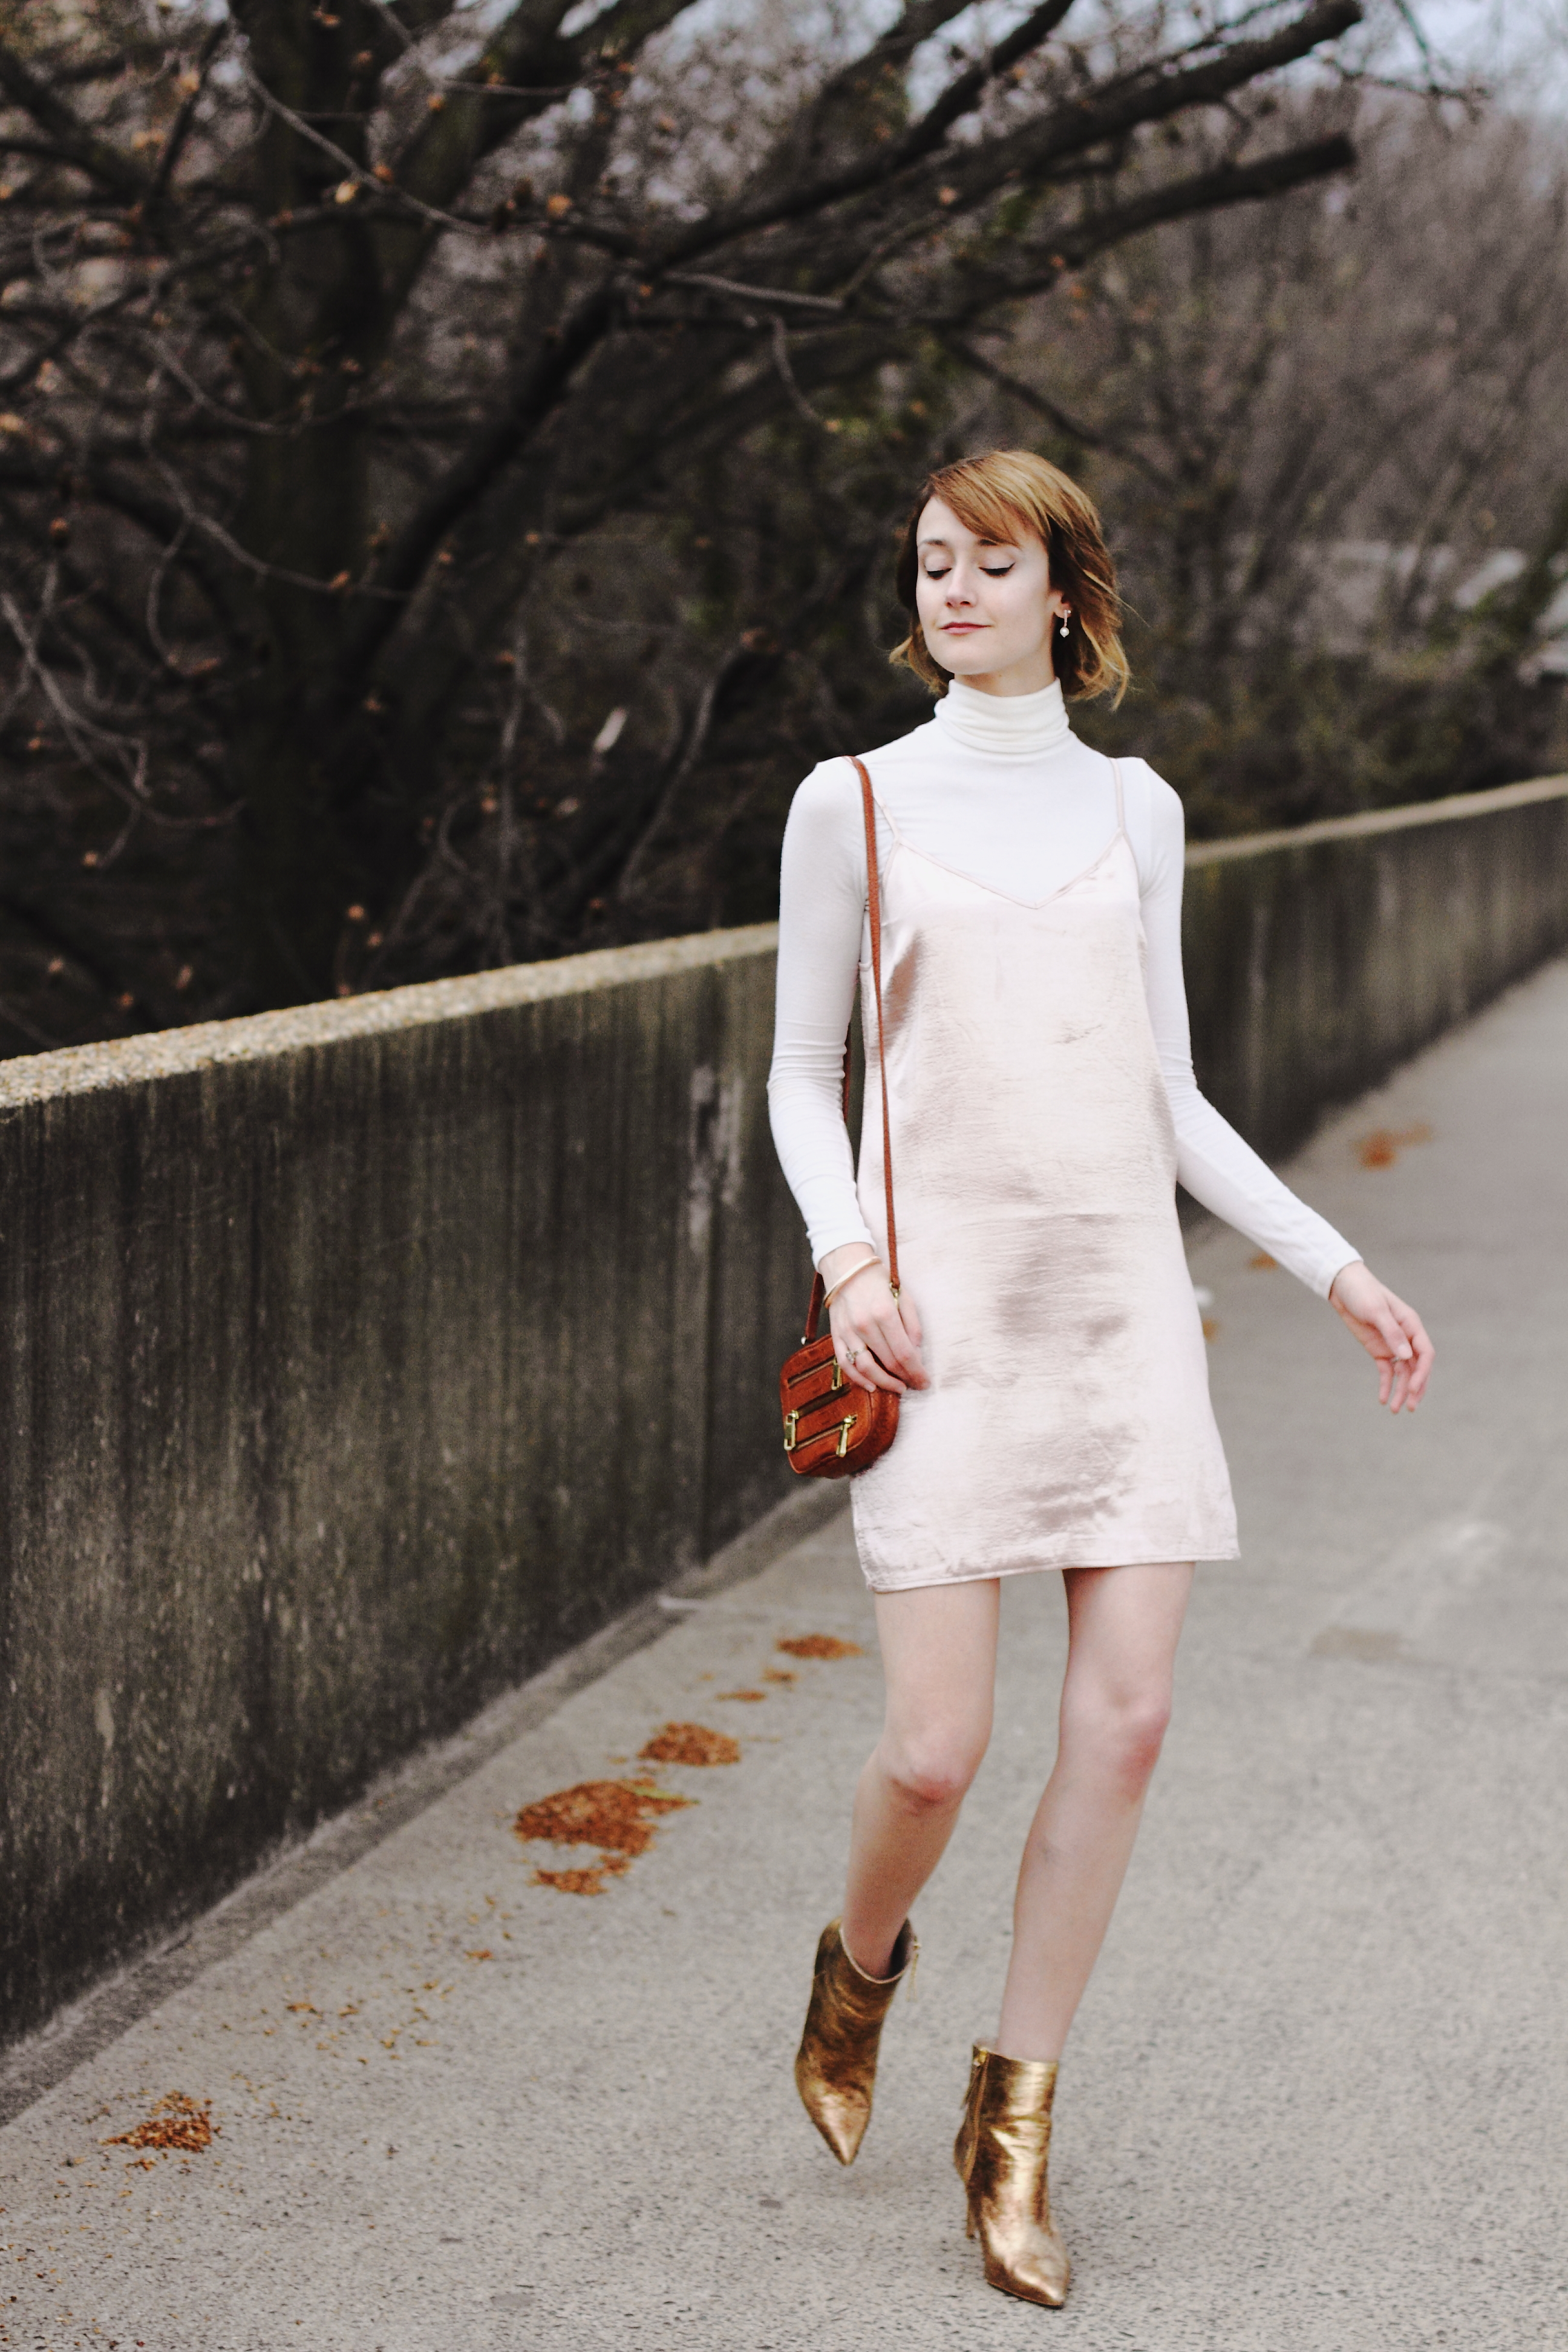 Reformation turtleneck, Genuine People slip dress and gold ankle boots